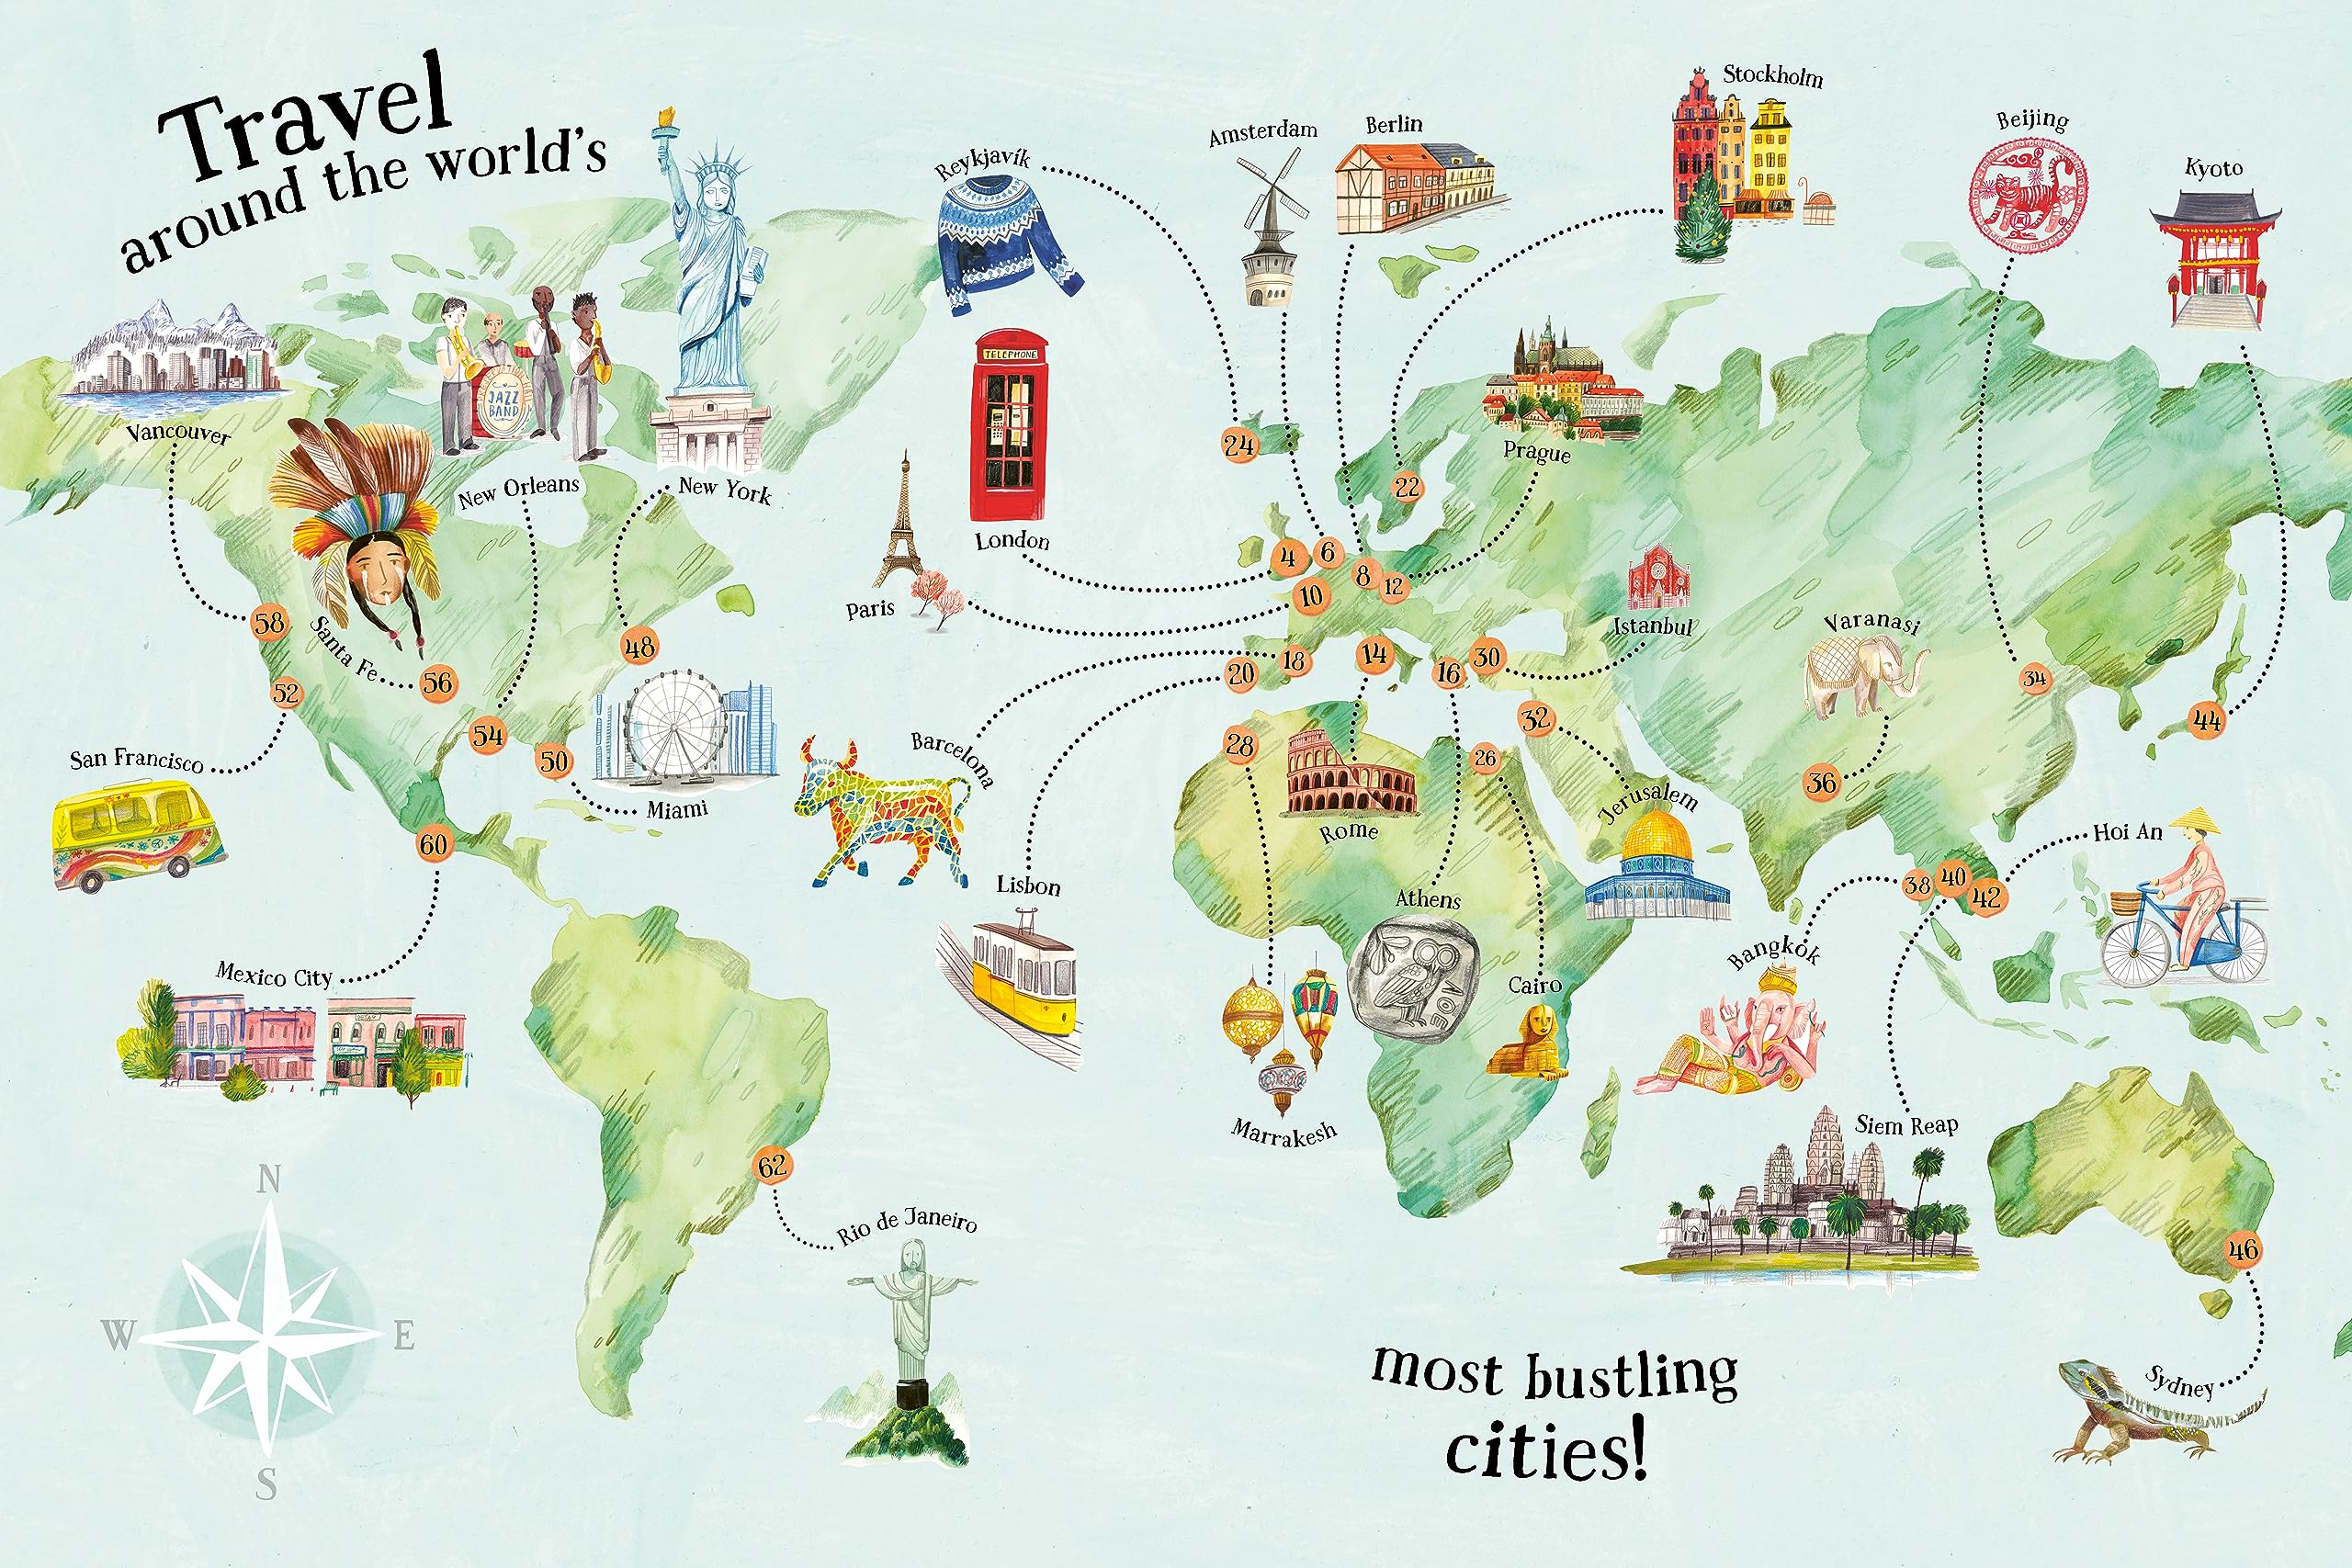 Bustling Cities of the World